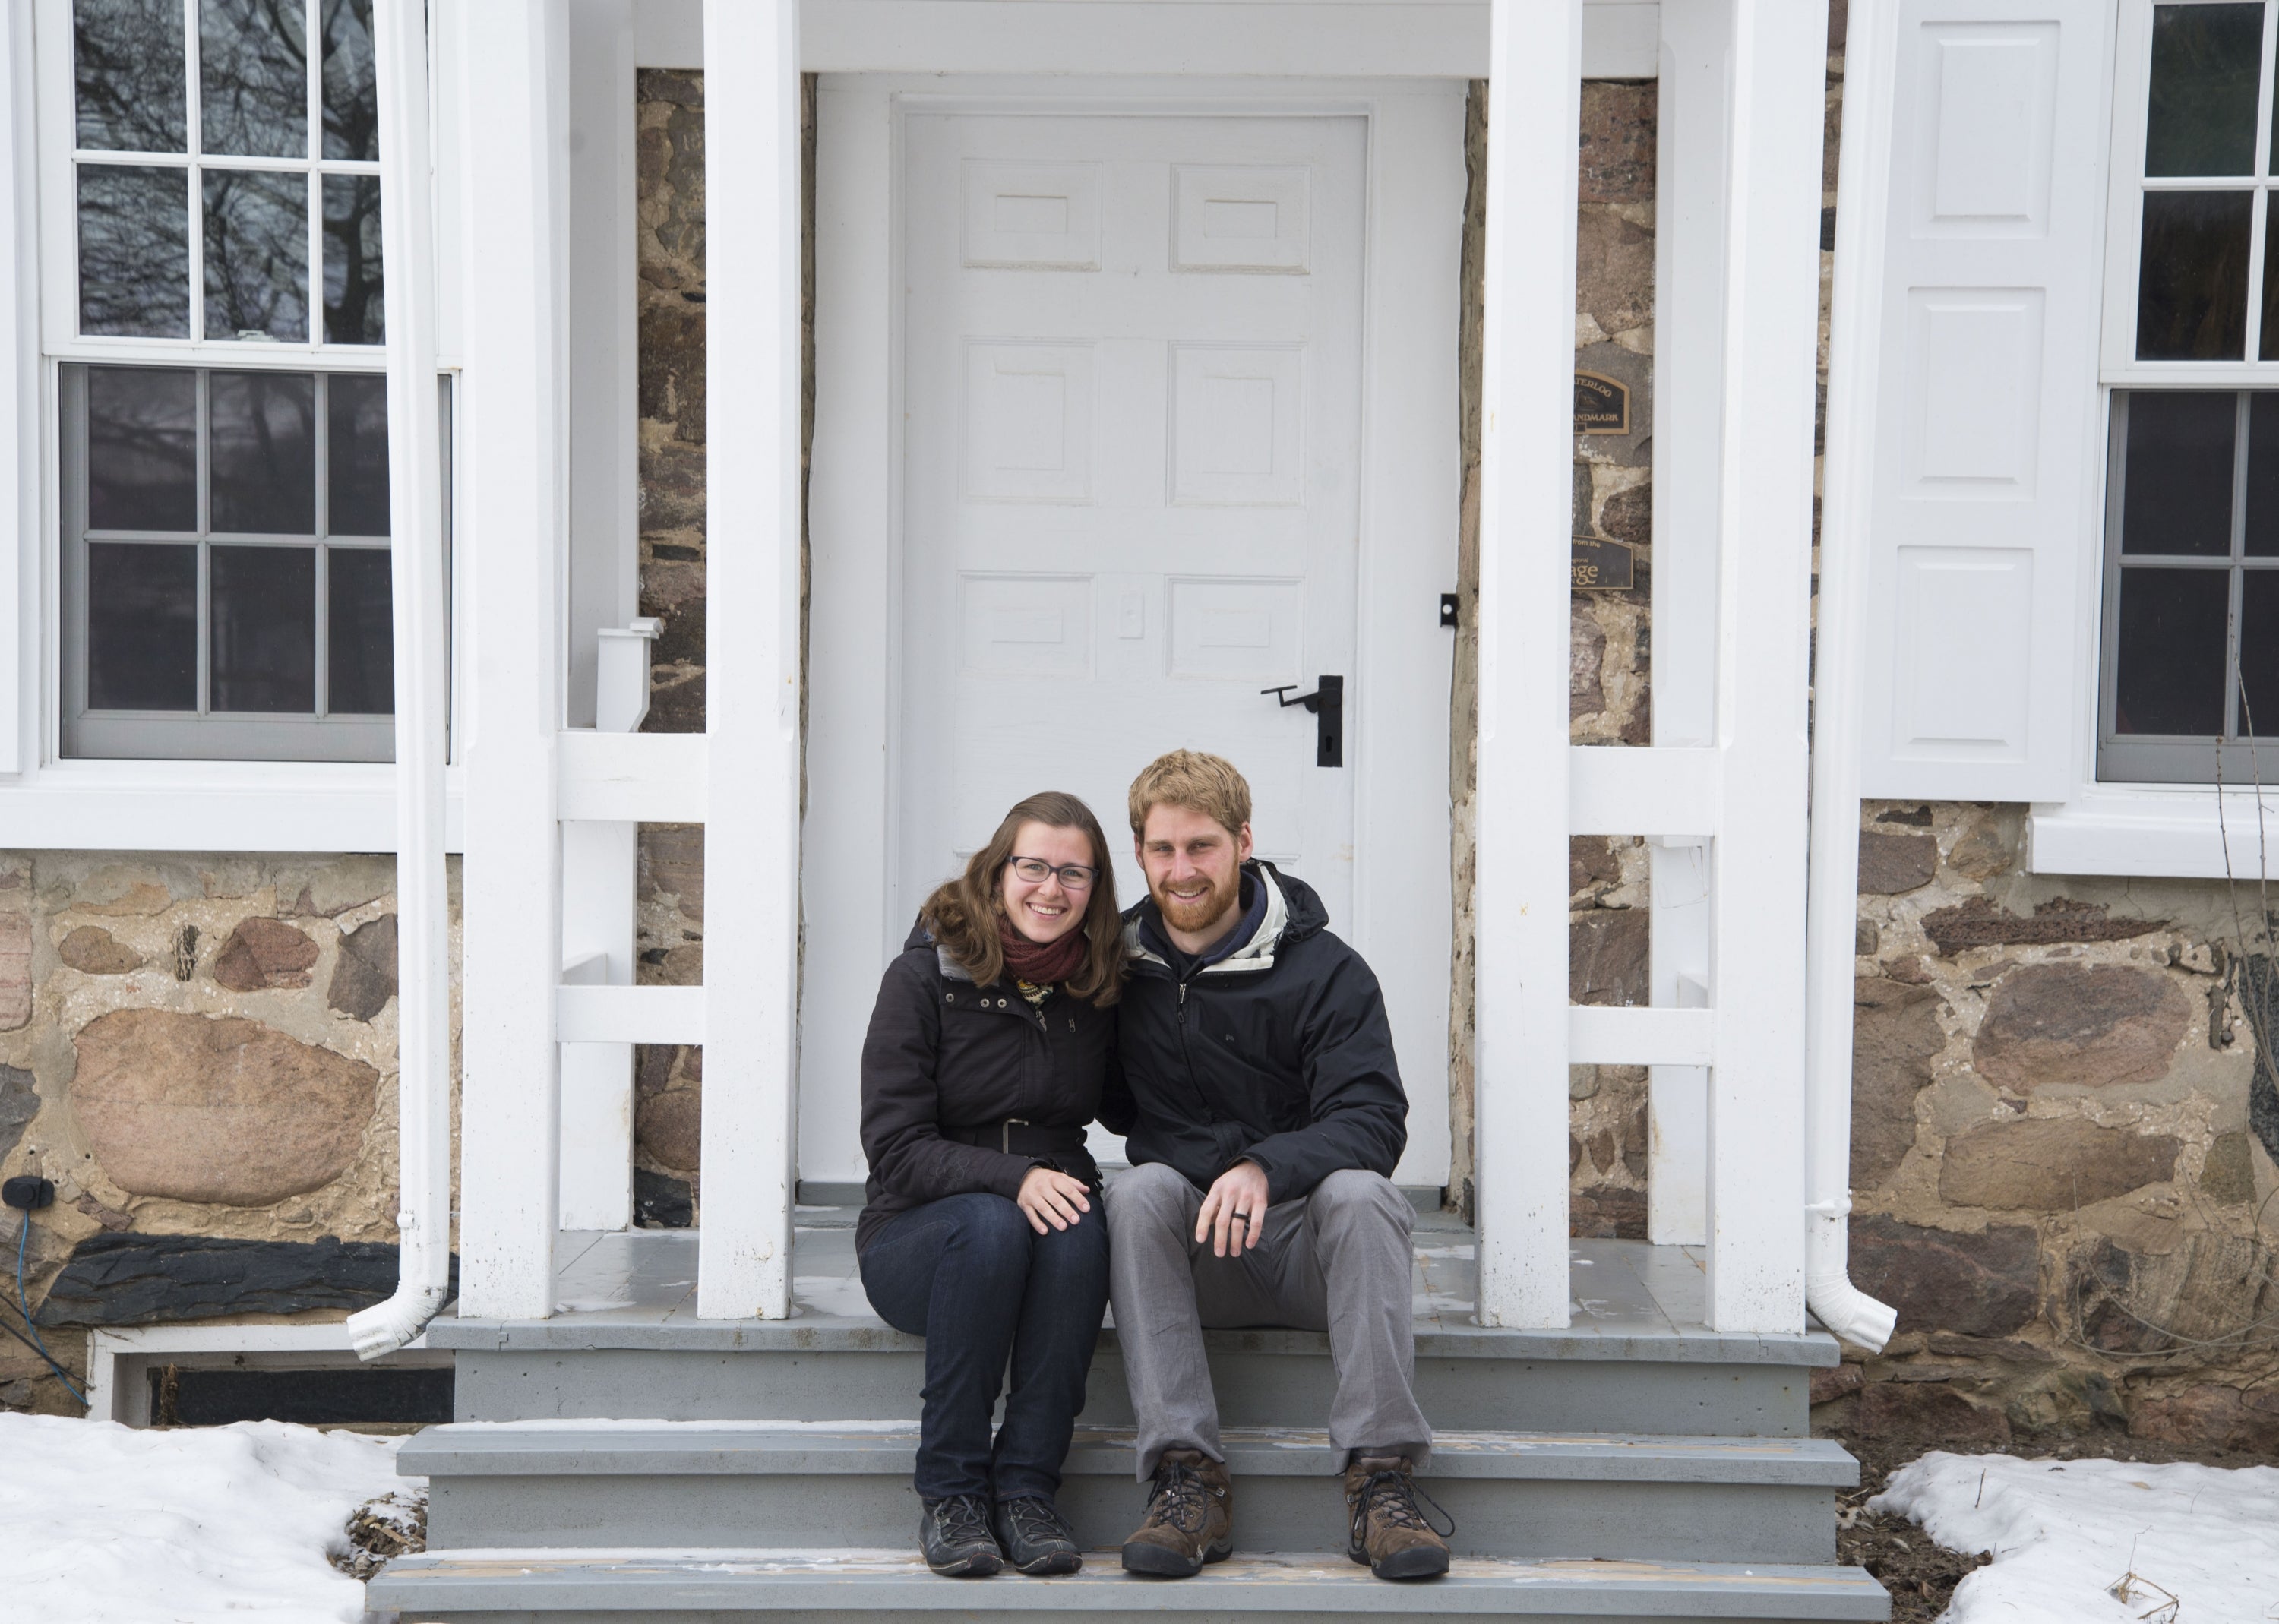 Laura and Joshua Enns in front of the Brubacher house